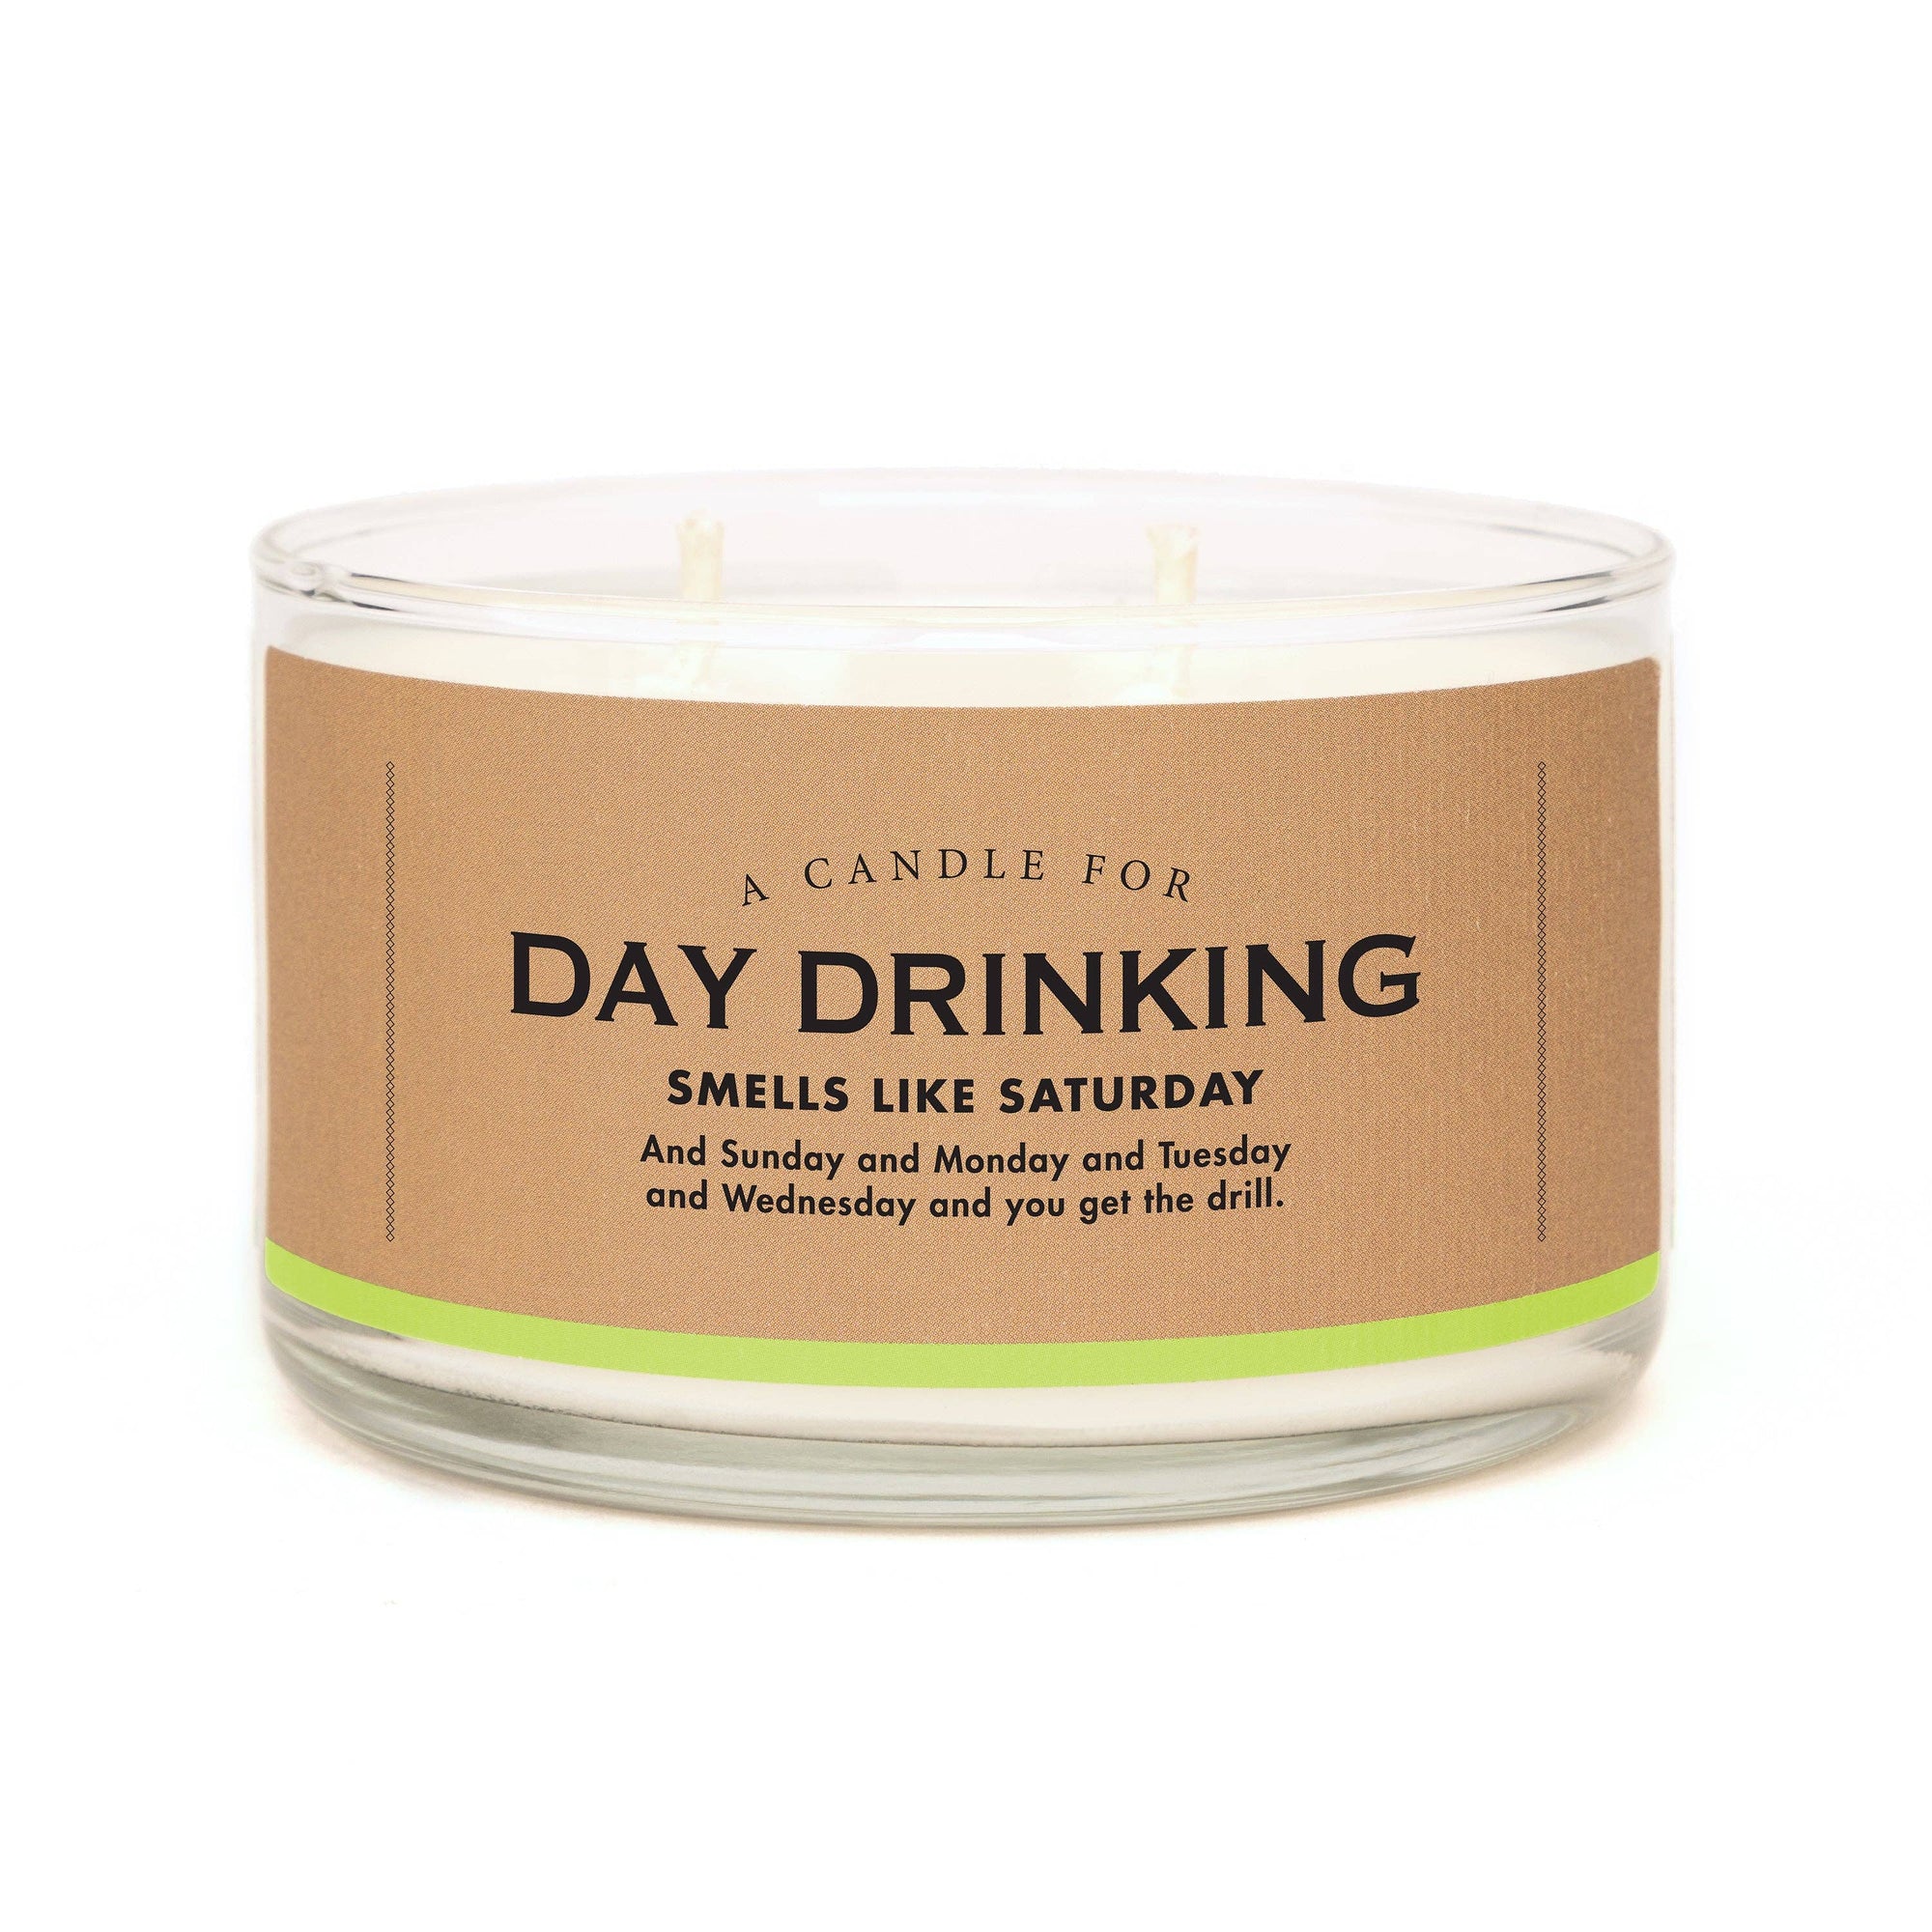 A Candle for Day Drinking | Funny Candle